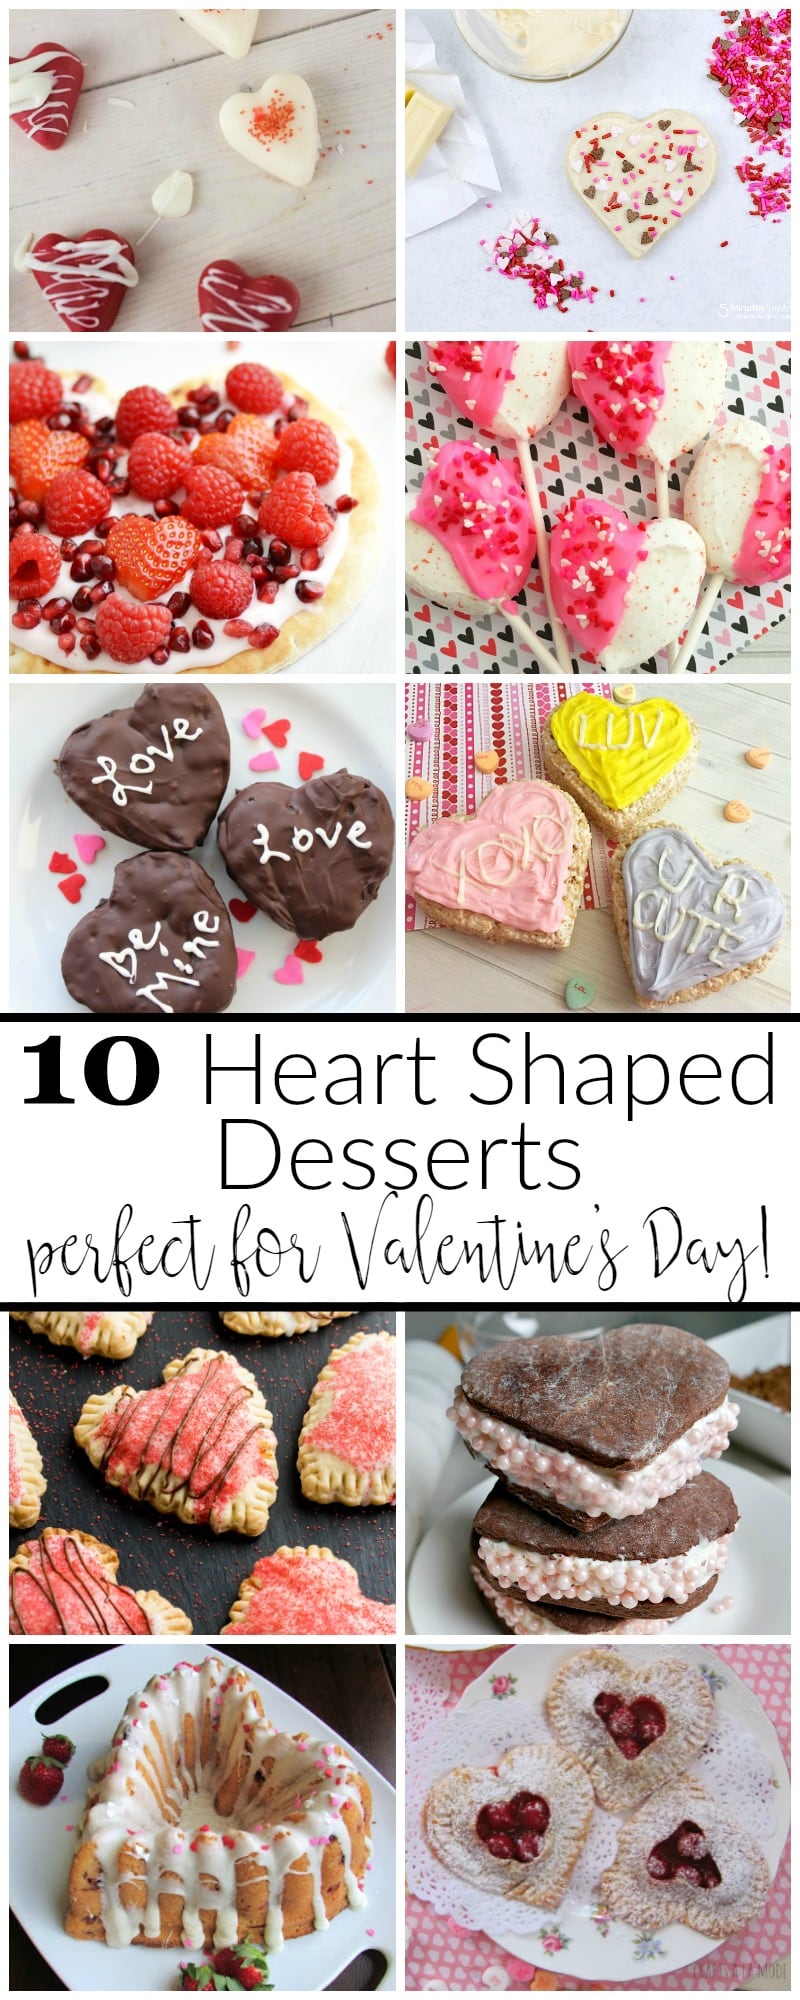 10 Heart Shaped desserts for Valentine's Day